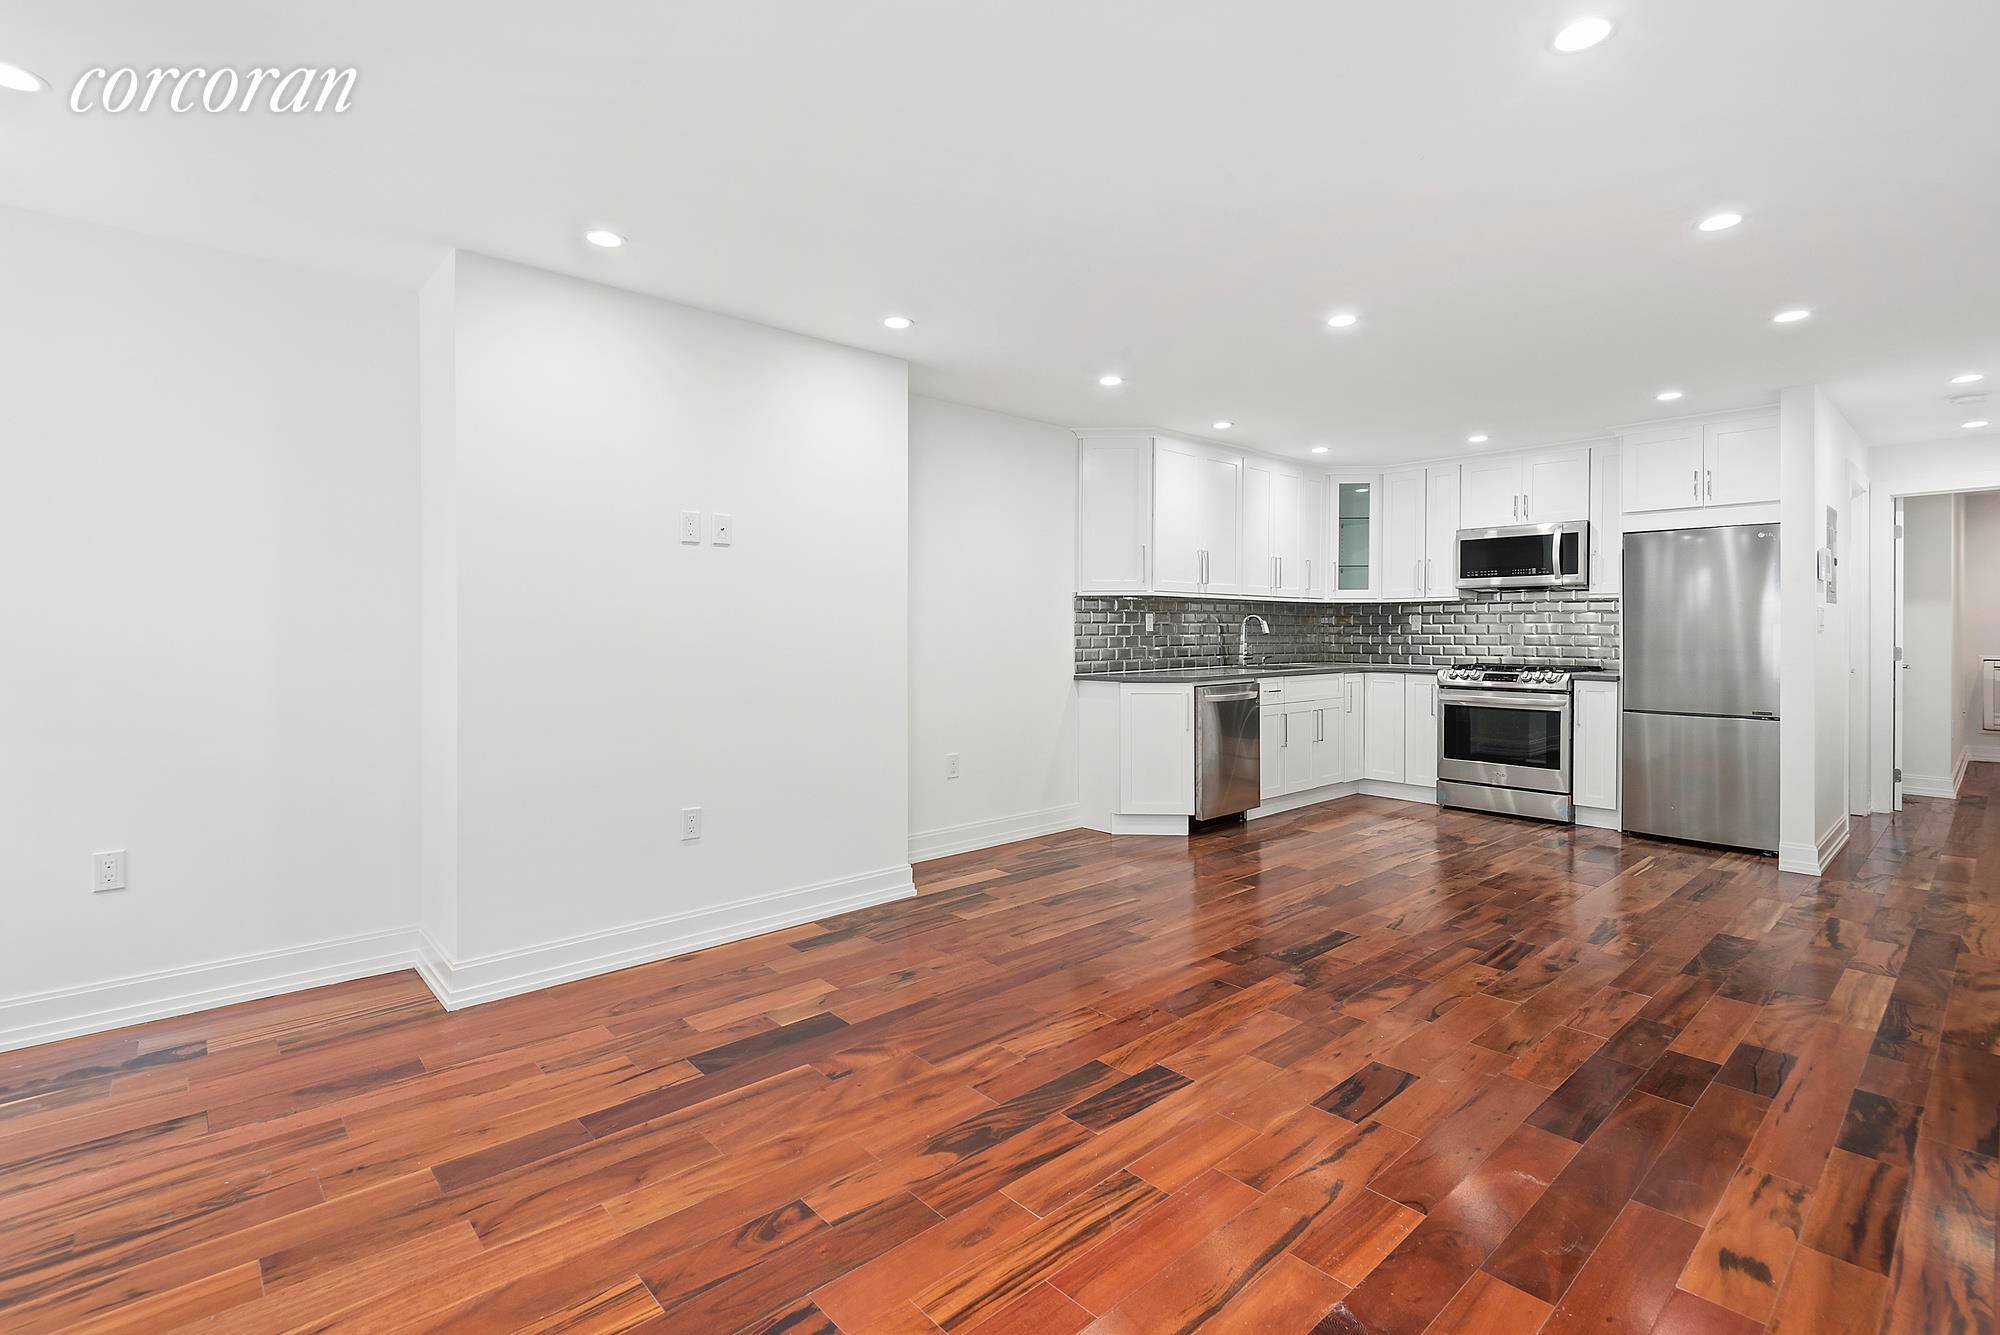 MODERNITY Live the life youA ve always wanted in this modern day beauty located in the heart of BrooklynA s sought after Bushwick neighborhood.